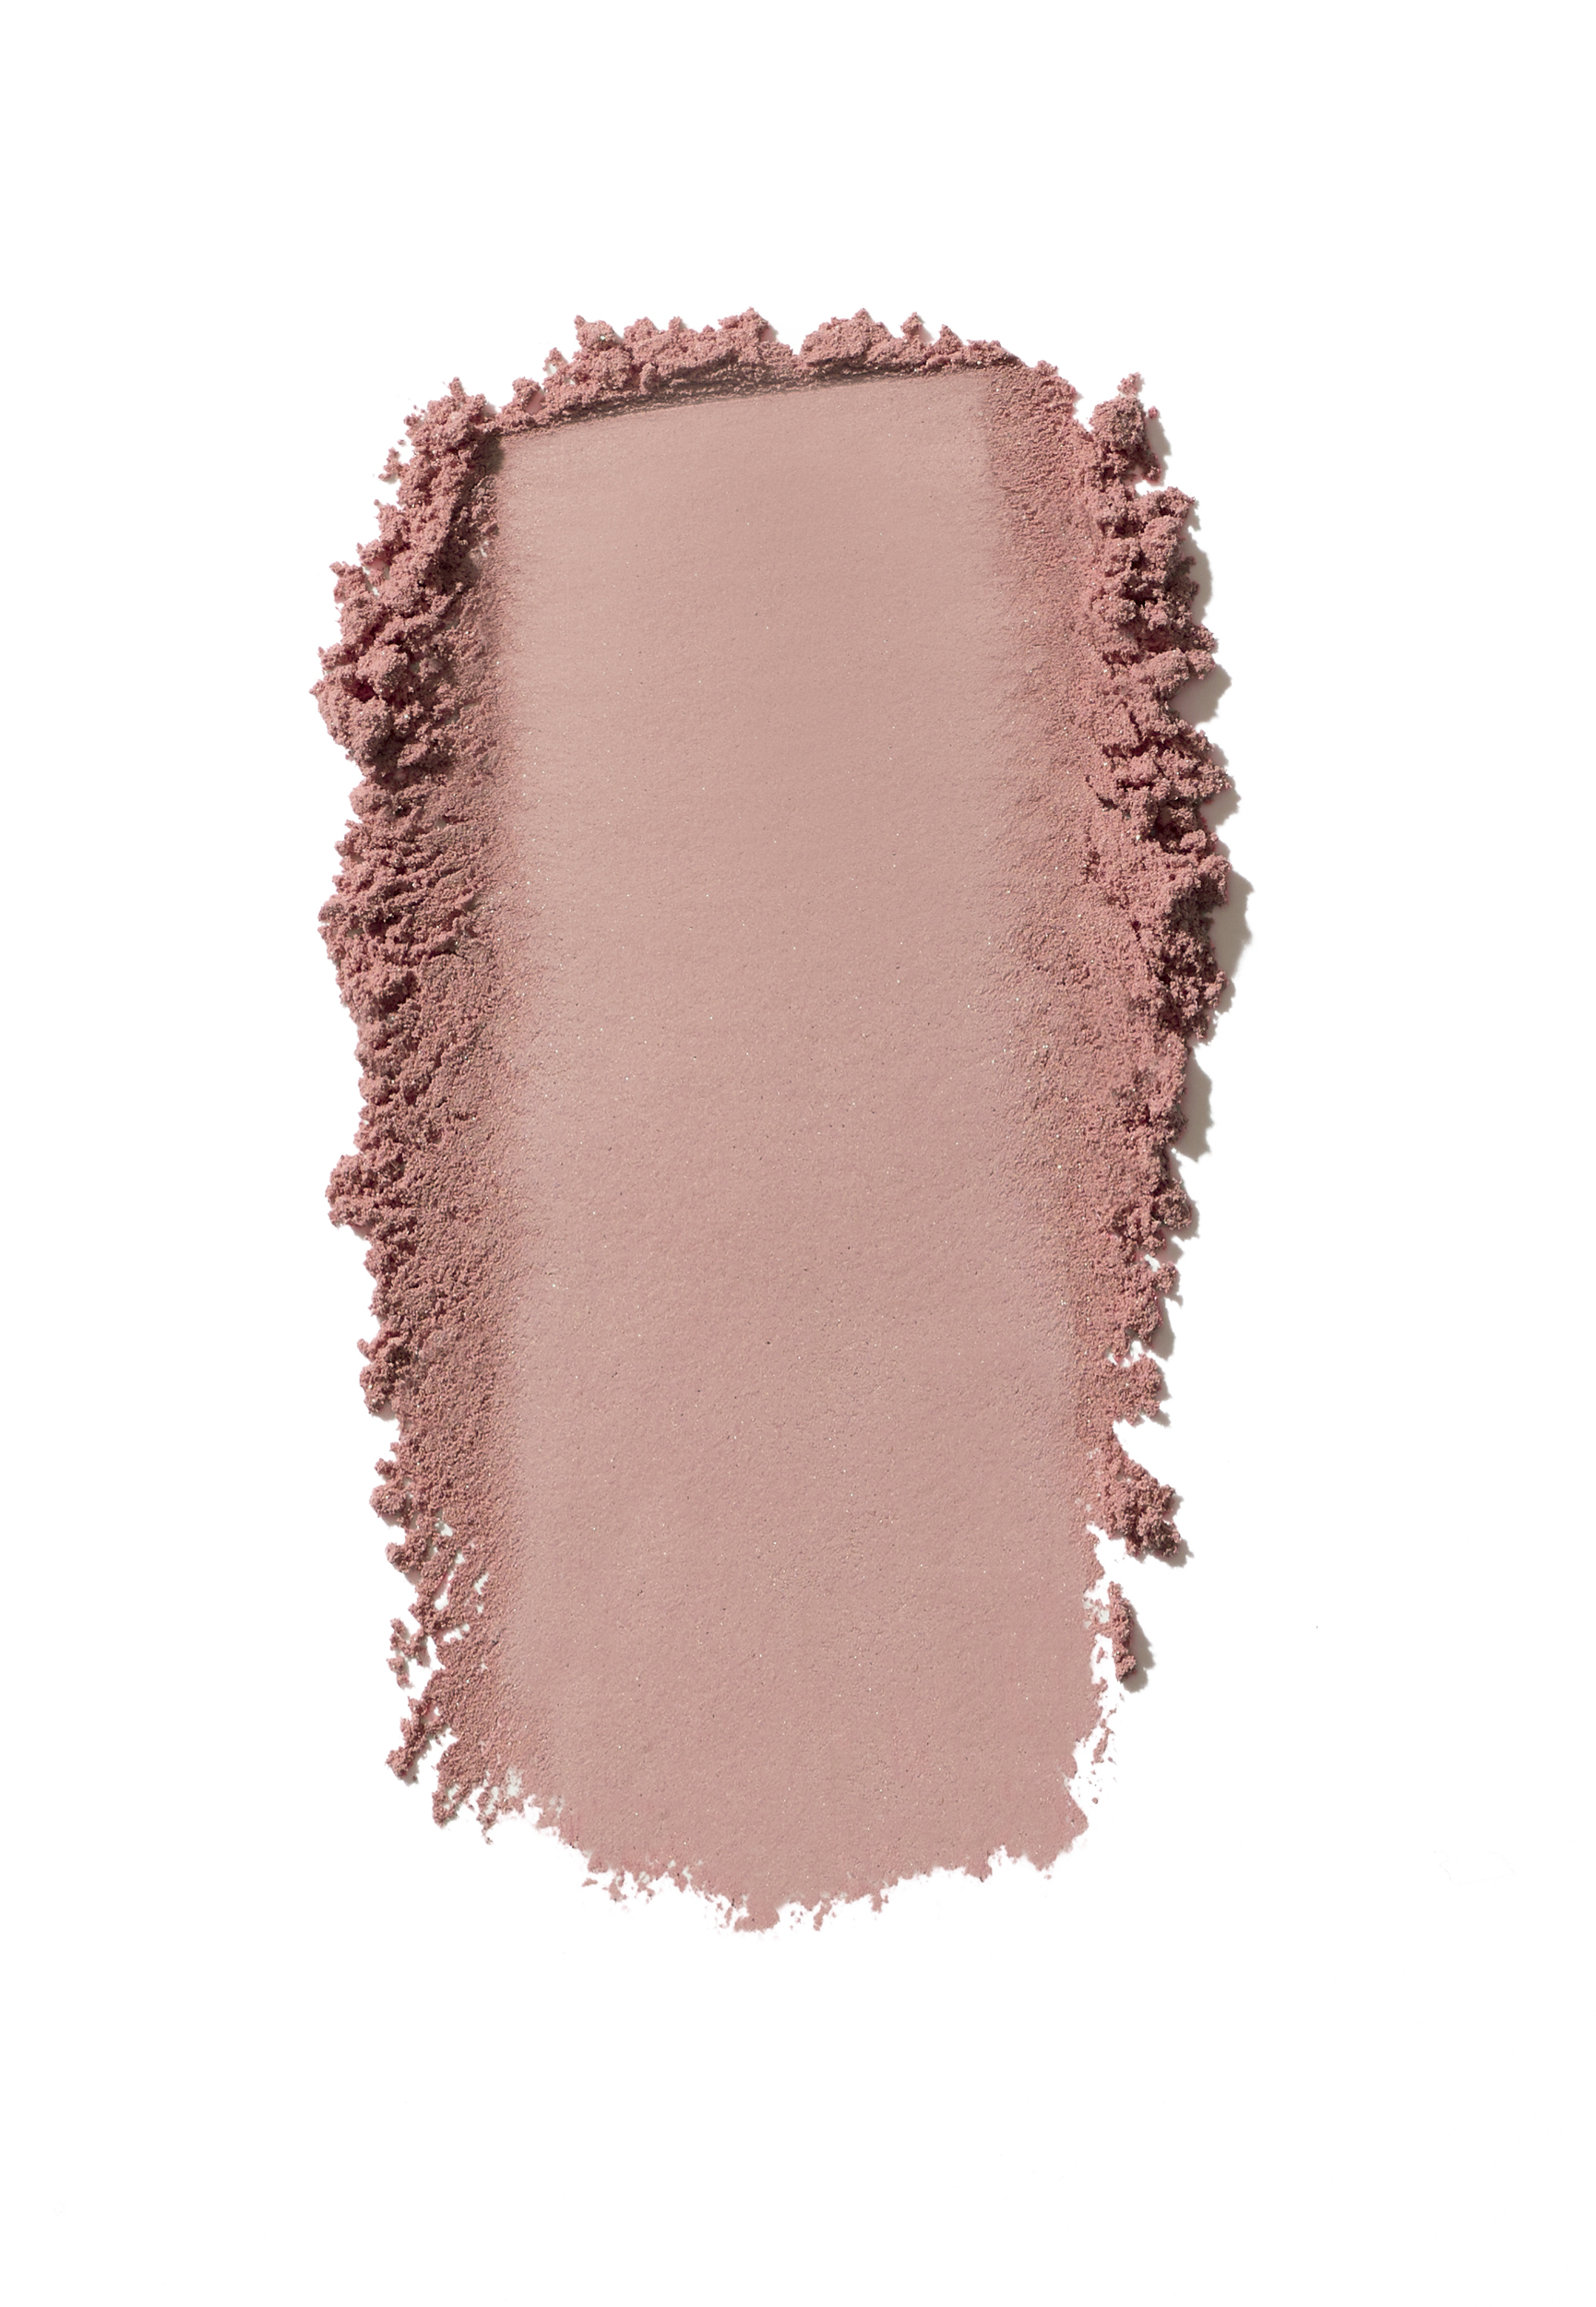 jane iredale purepressed blush new barely rose touche